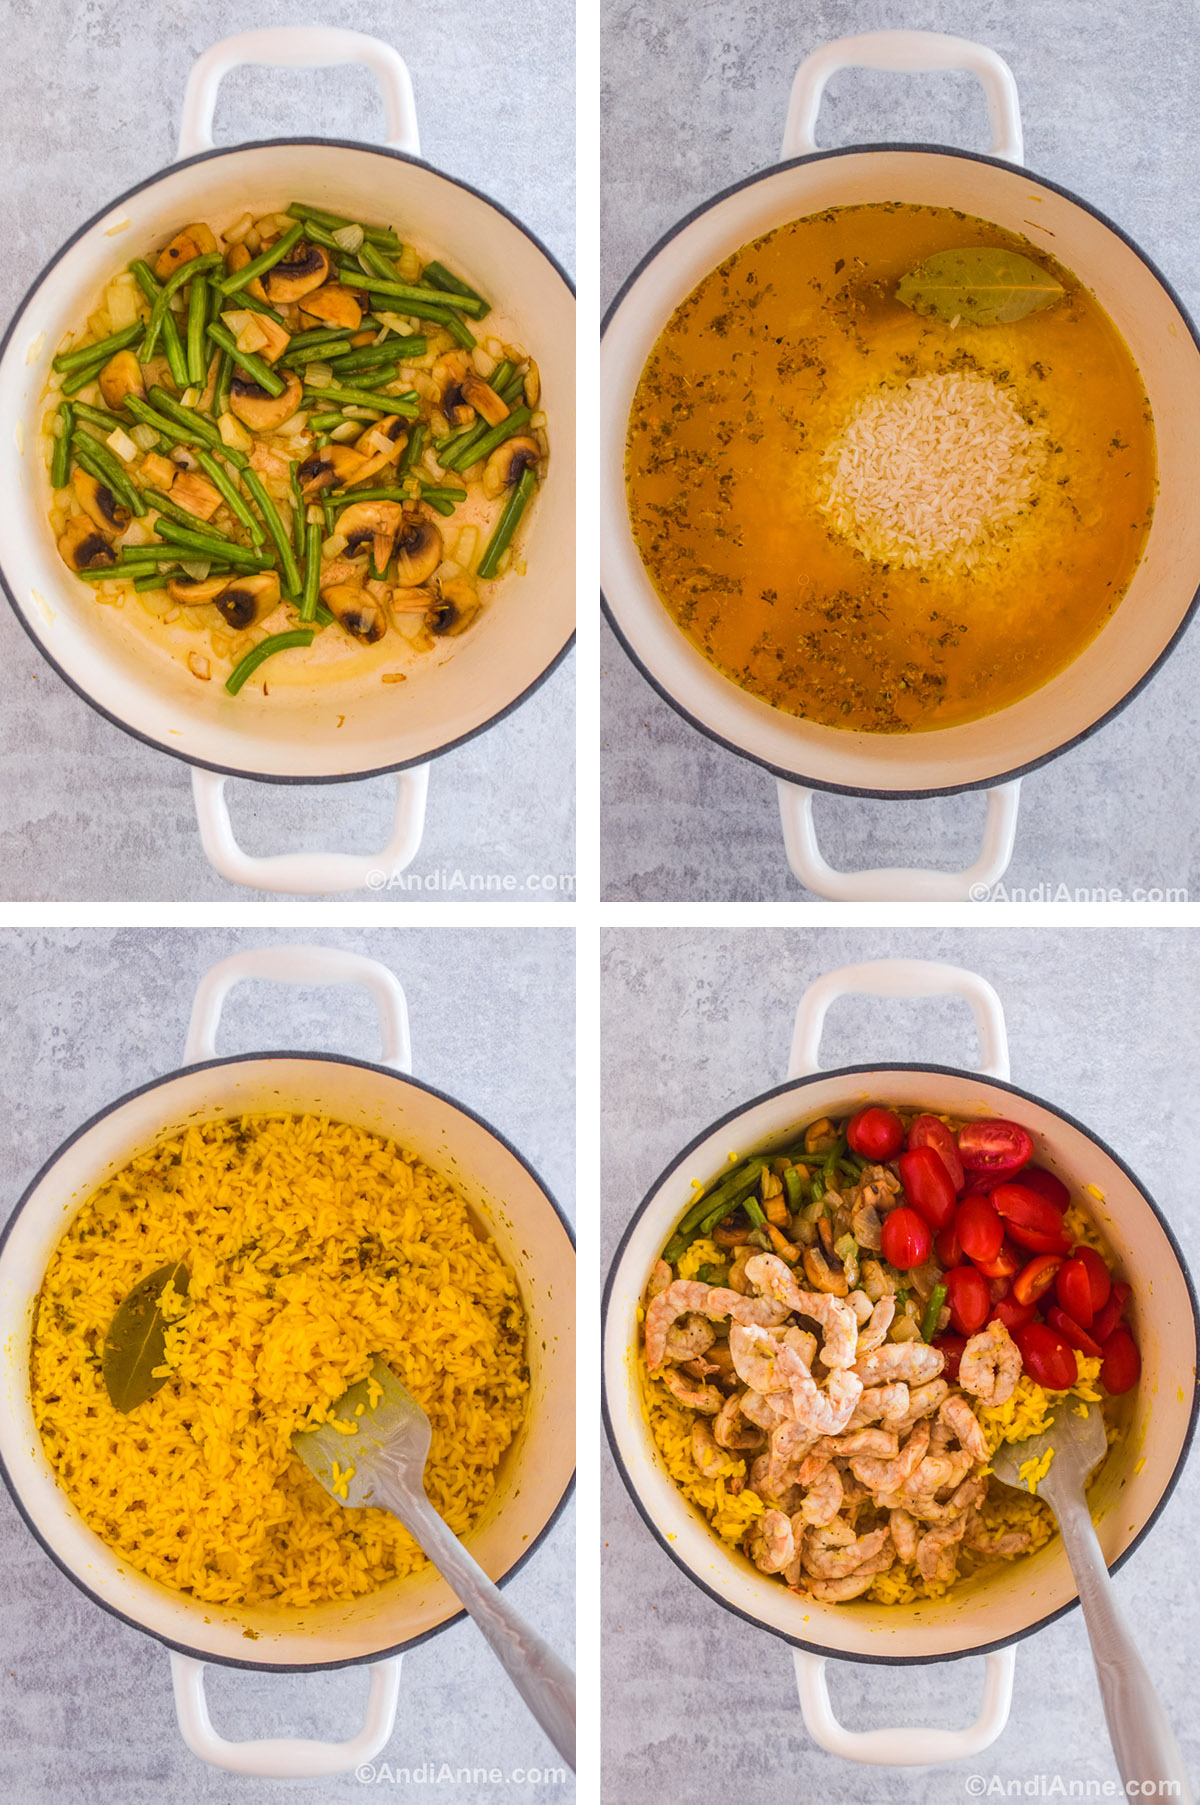 Four images grouped together. First is the white pot with chopped onion, mushrooms and green beans. Second is yellow liquid, spices, a bay leaf and uncooked rice in the pot. Third is cooked yellow rice with spices and bay leaf. Fourth is raw shrimp, tomatoes and green beans on top of the rice in the white pot.